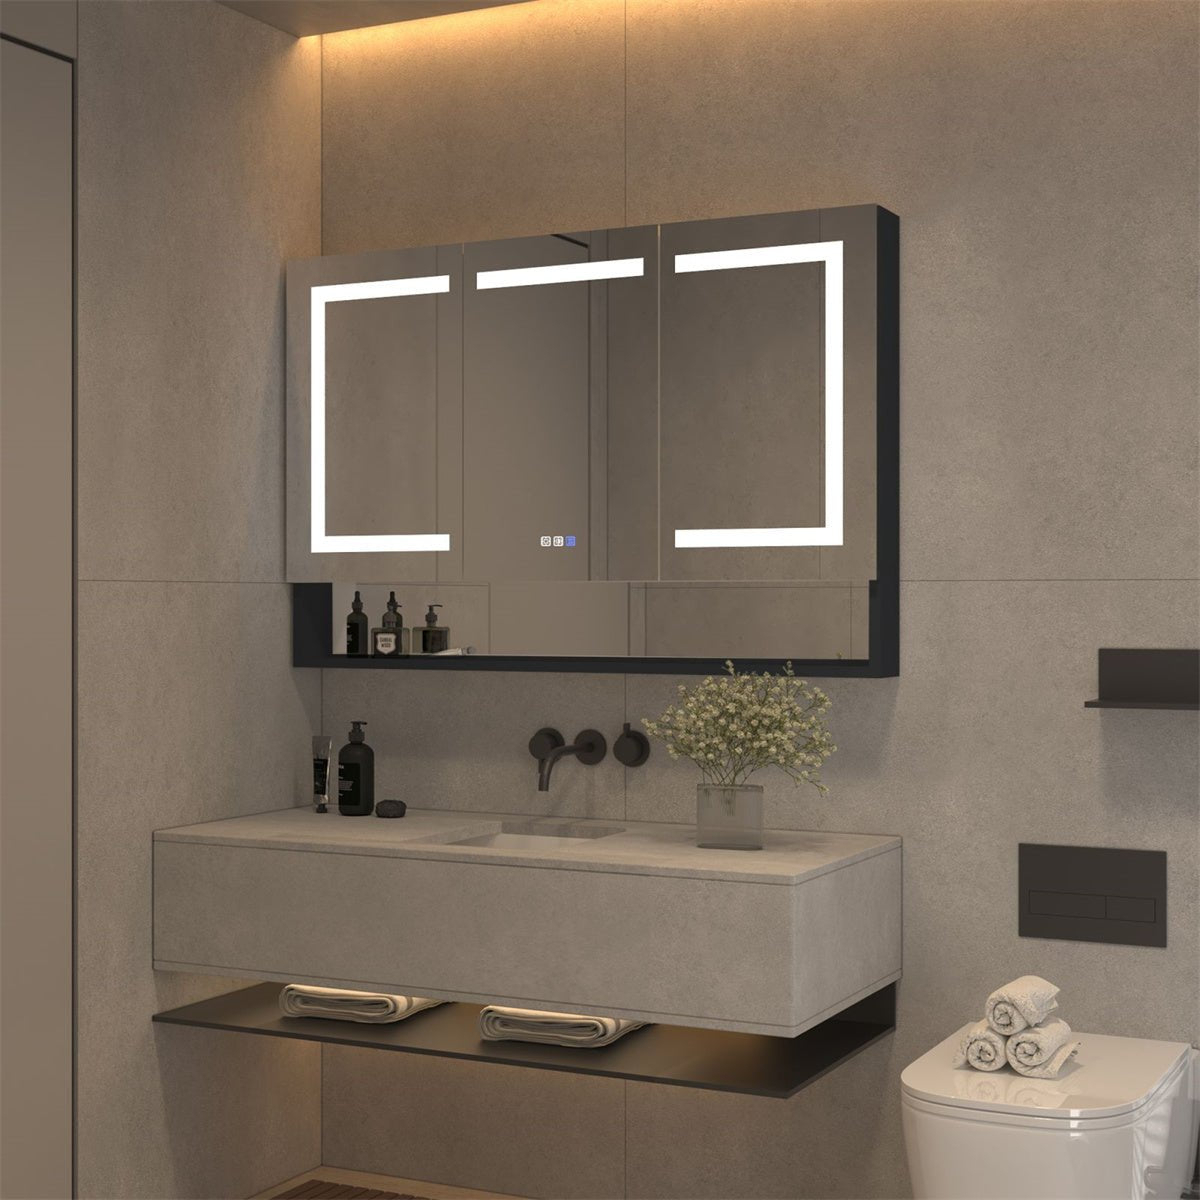 Ample 48 W X 32 H LED Lighted Mirror Black Medicine Cabinet With Shelves For Bathroom Recessed Or Surface Mount